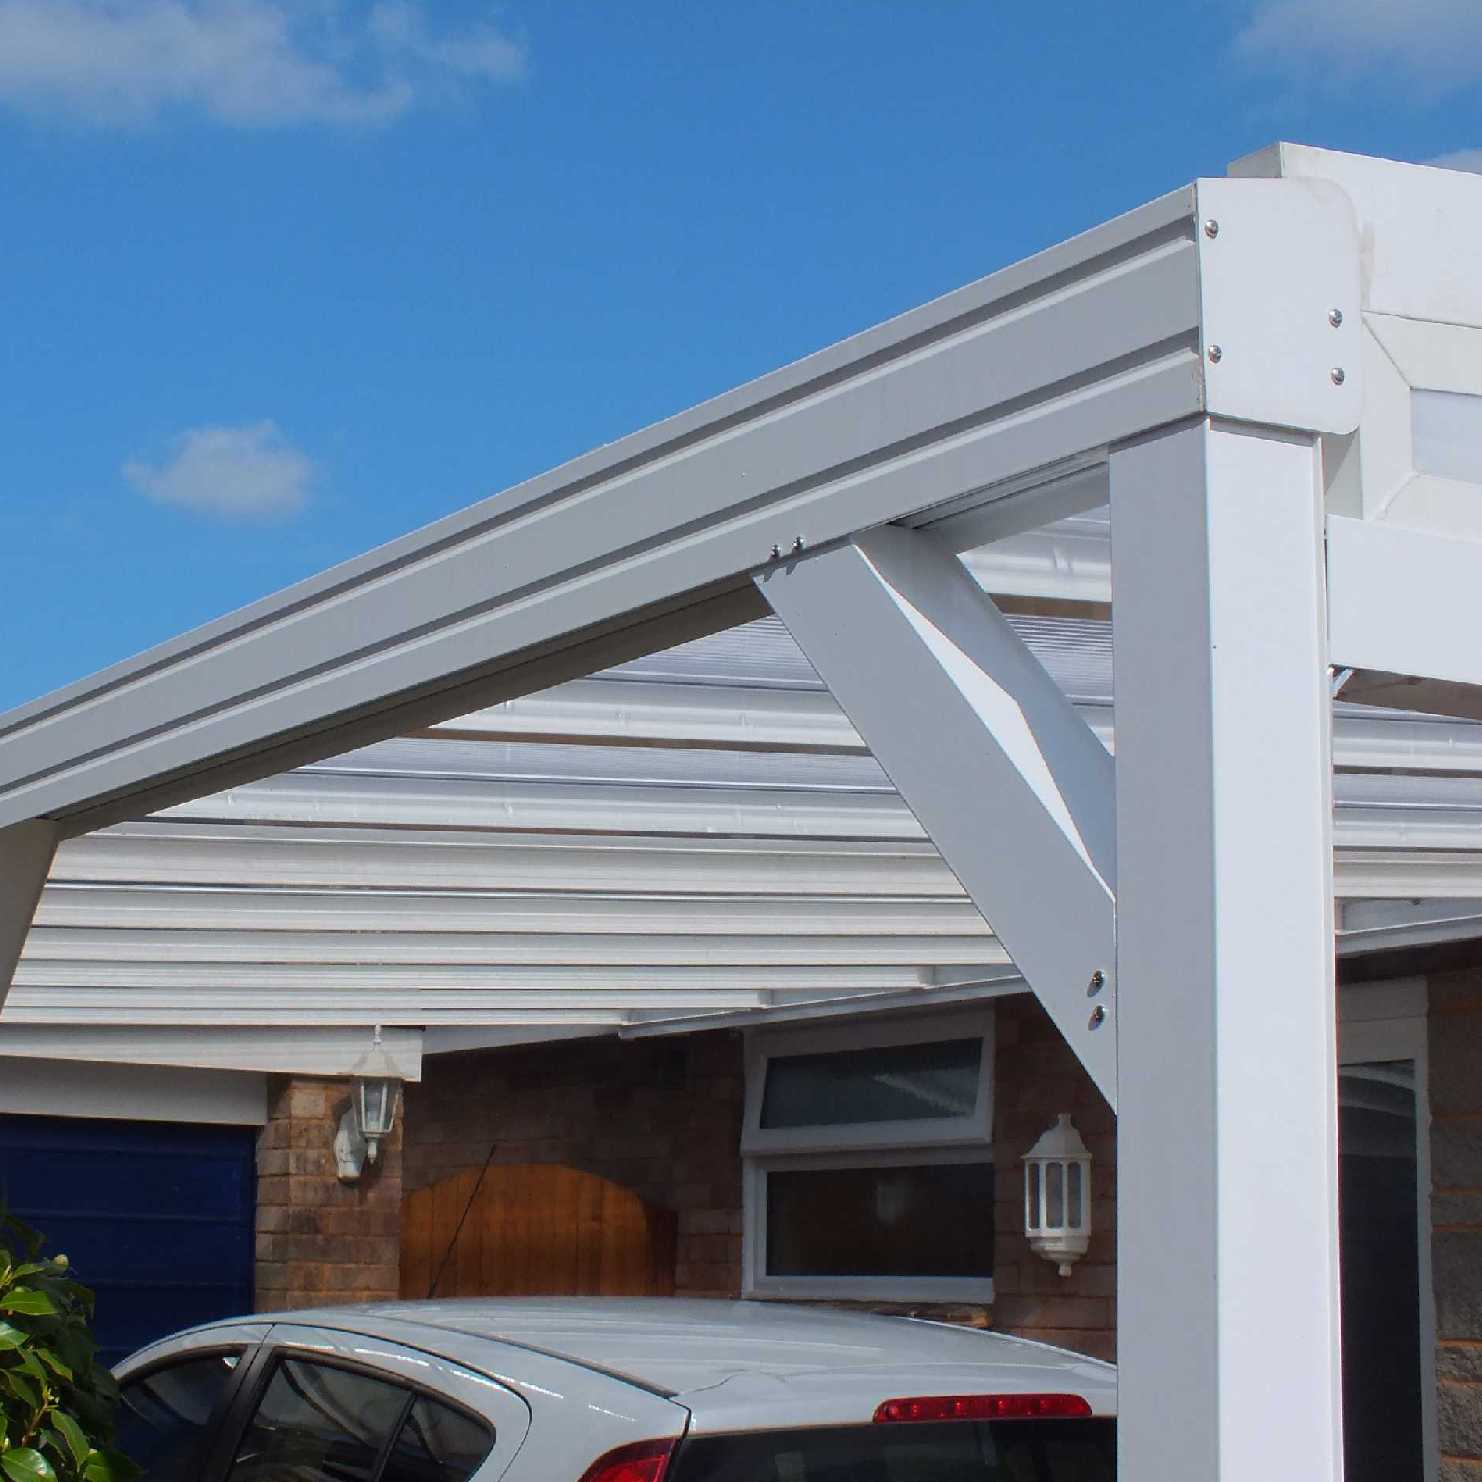 Great deals on Omega Smart Lean-To Canopy, White with 16mm Polycarbonate Glazing - 12.0m (W) x 2.0m (P), (5) Supporting Posts